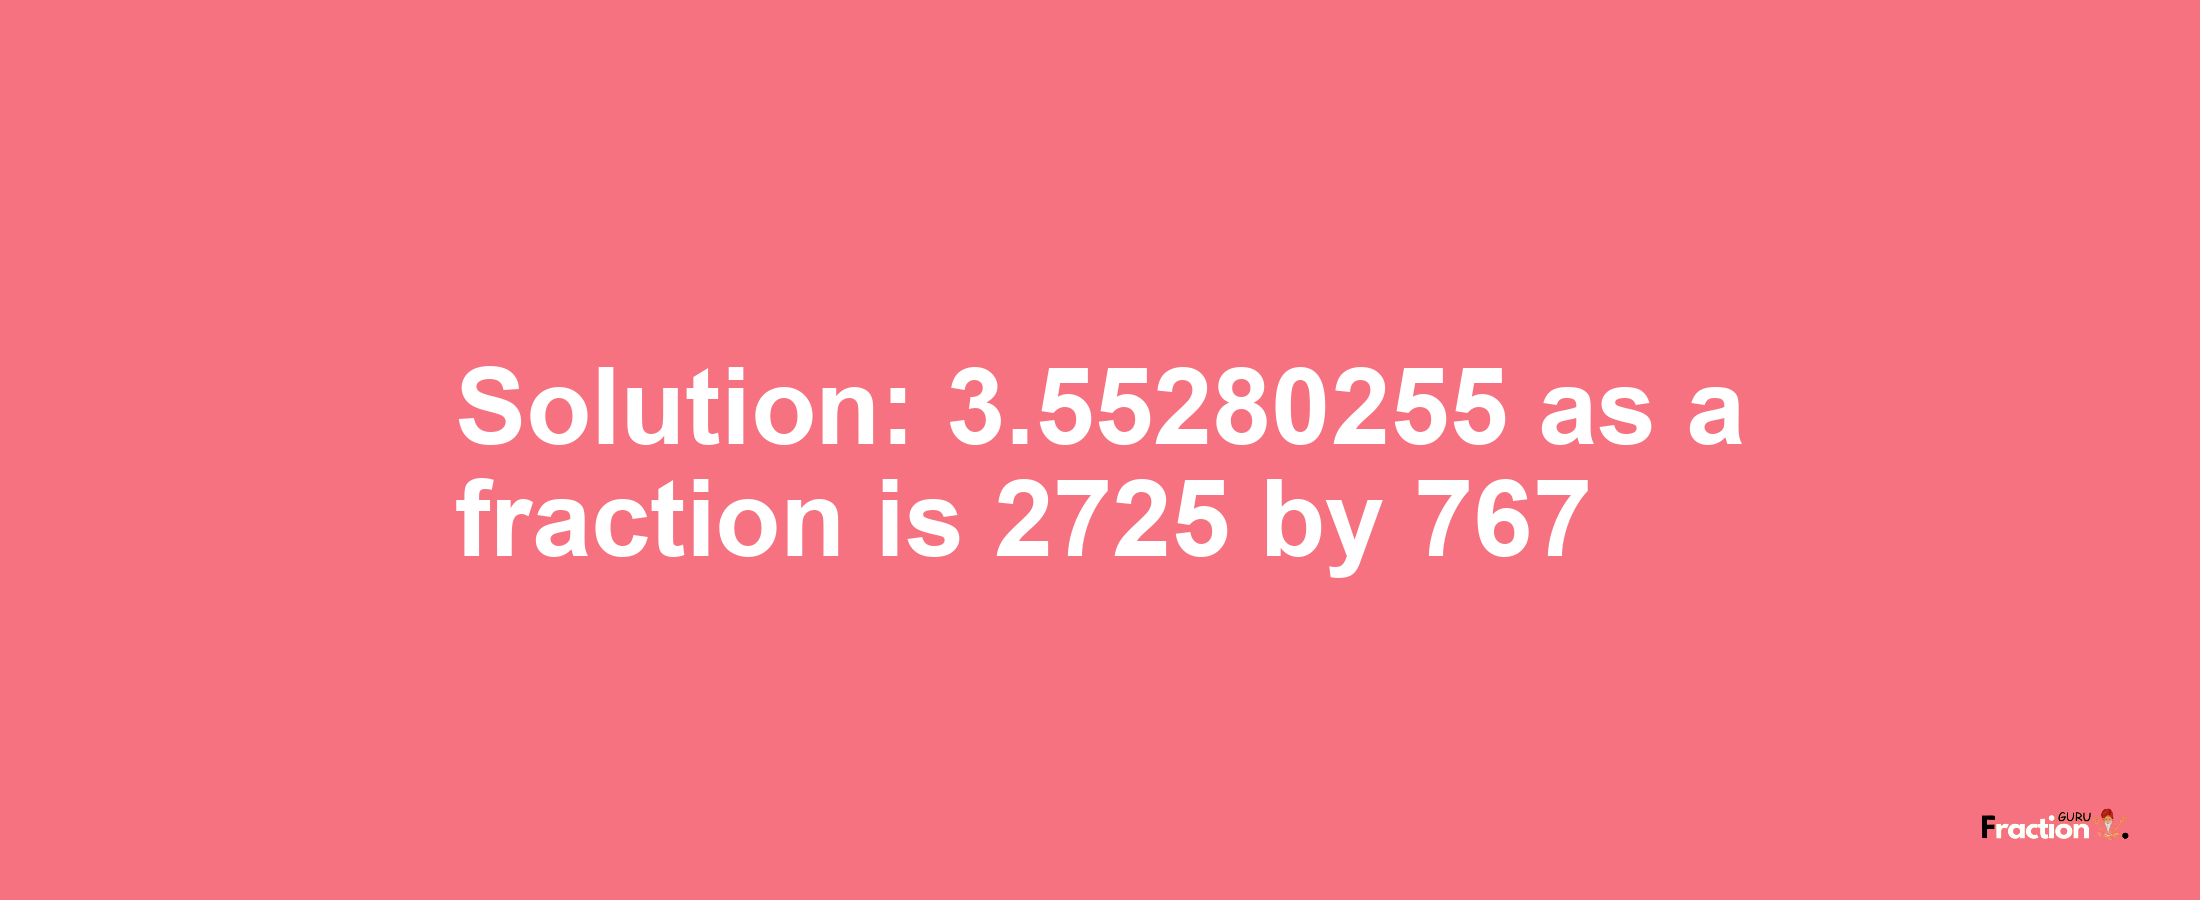 Solution:3.55280255 as a fraction is 2725/767